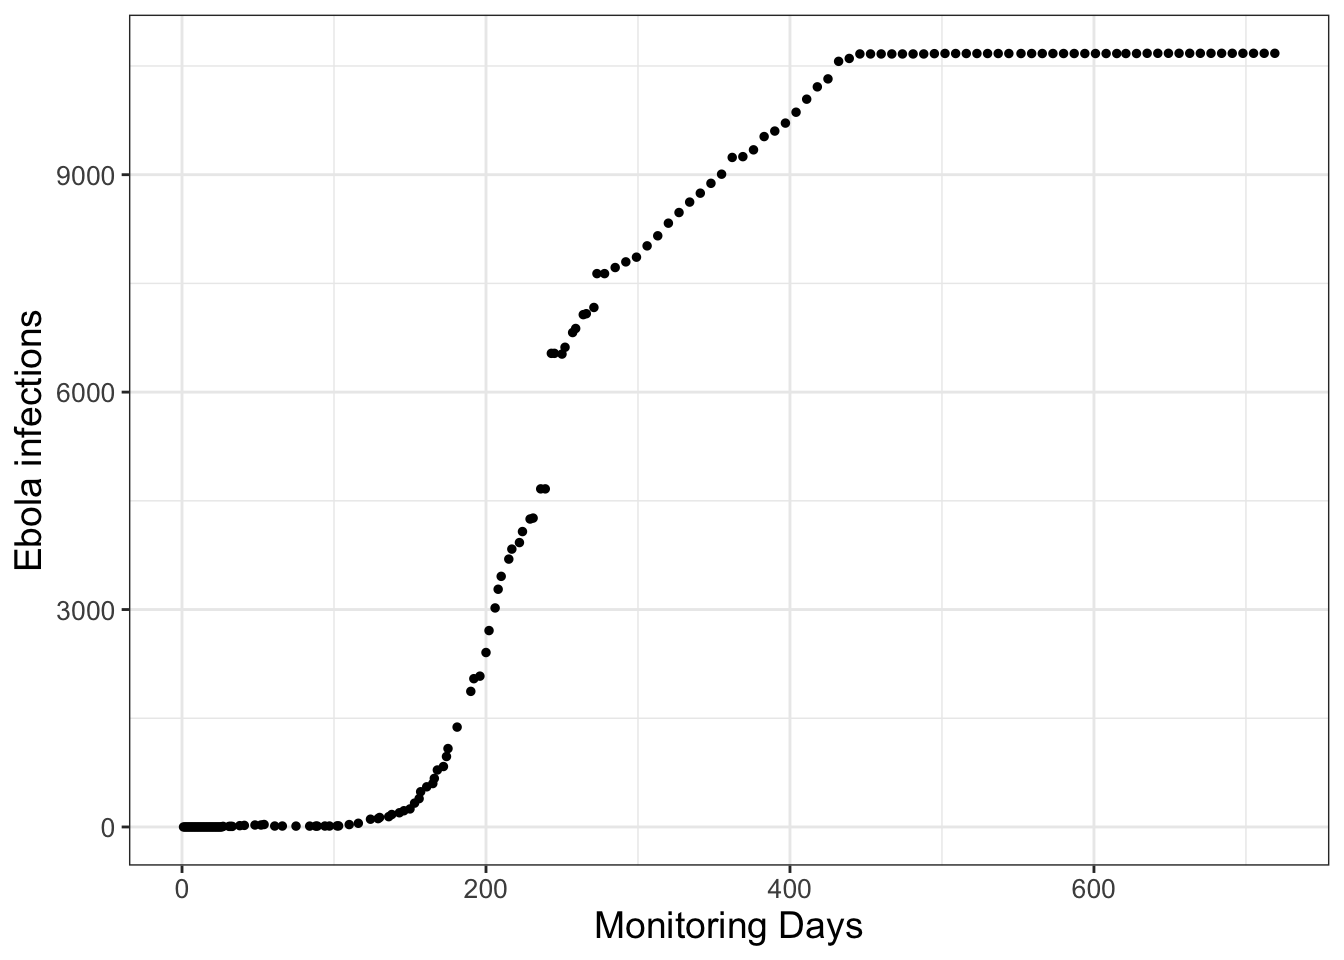 Infections from a 2014 Ebola outbreak in Liberia, with the initial monitoring in March 2014.